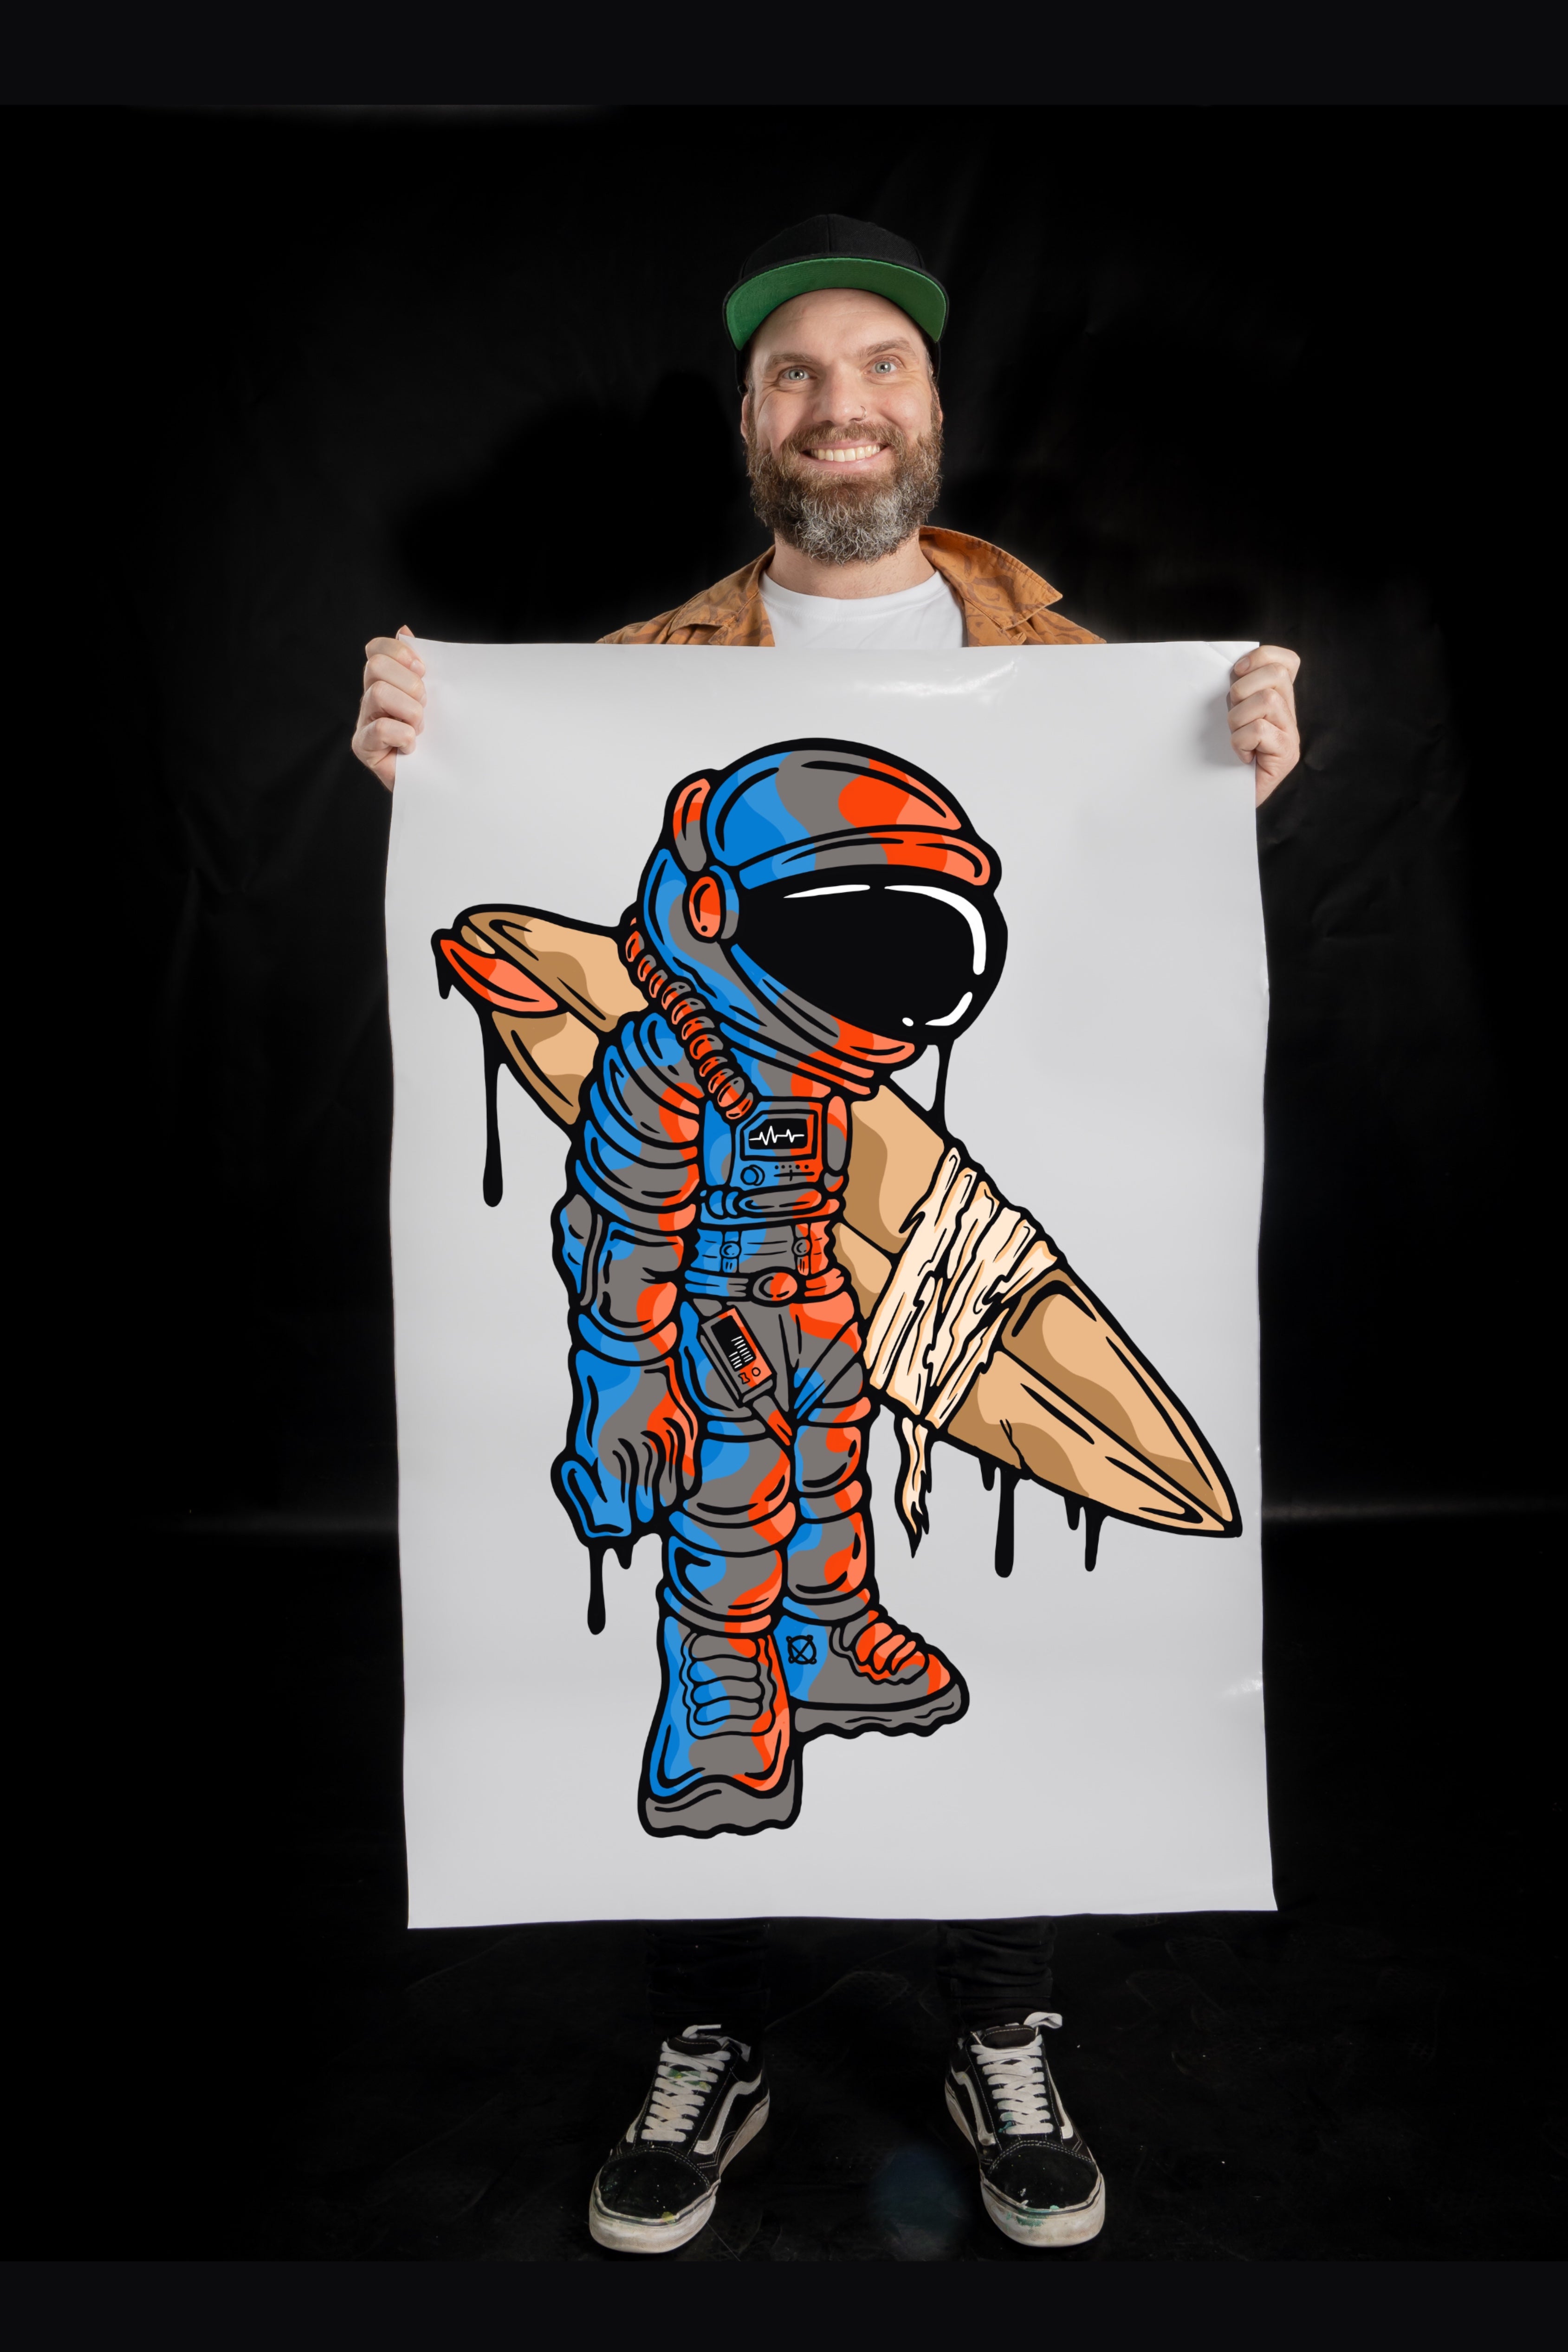 Wall Art Decal - Astro Dude